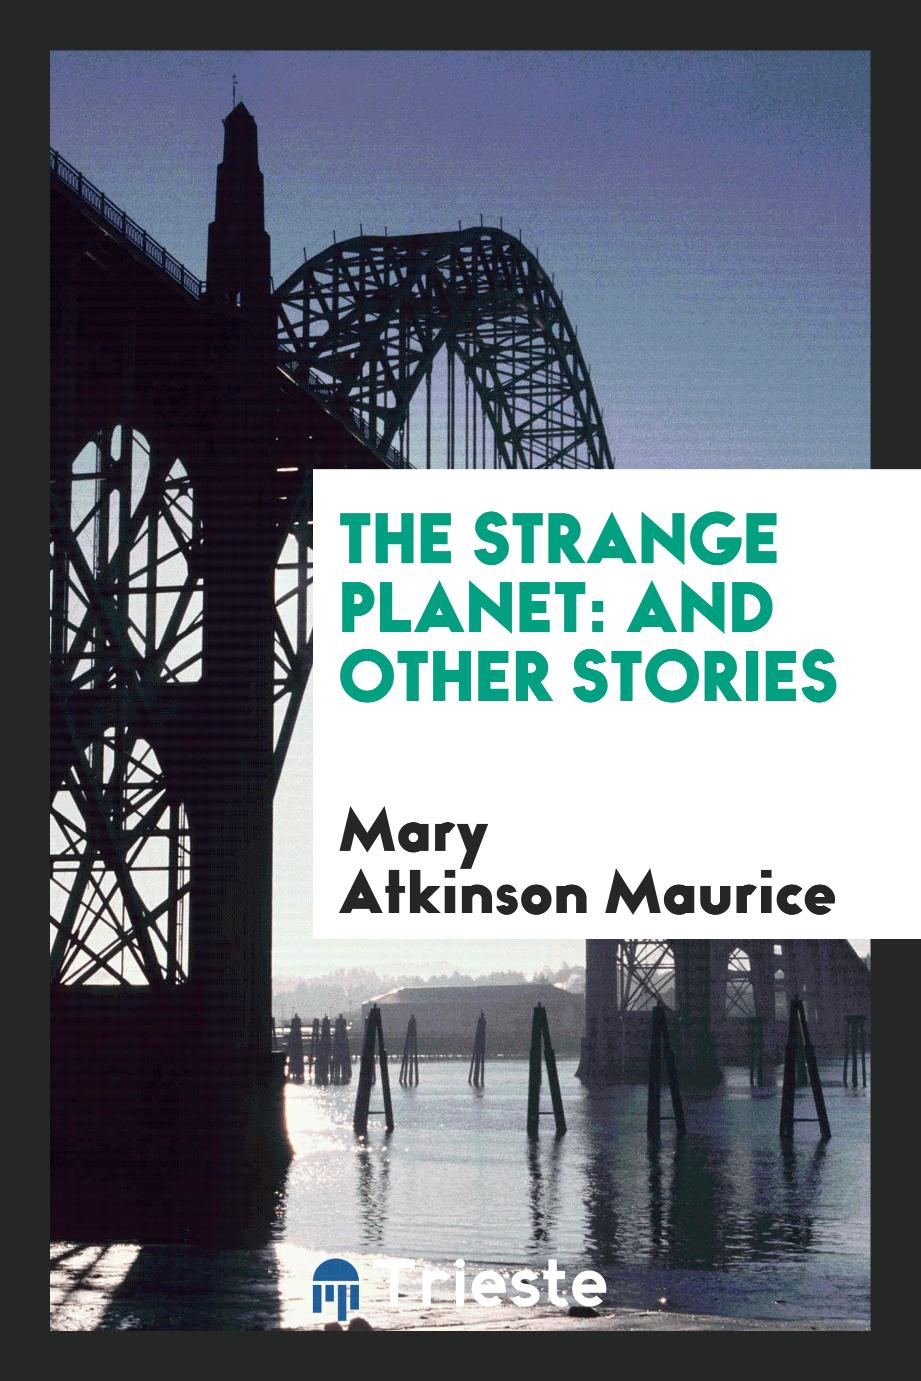 The strange planet: and other stories